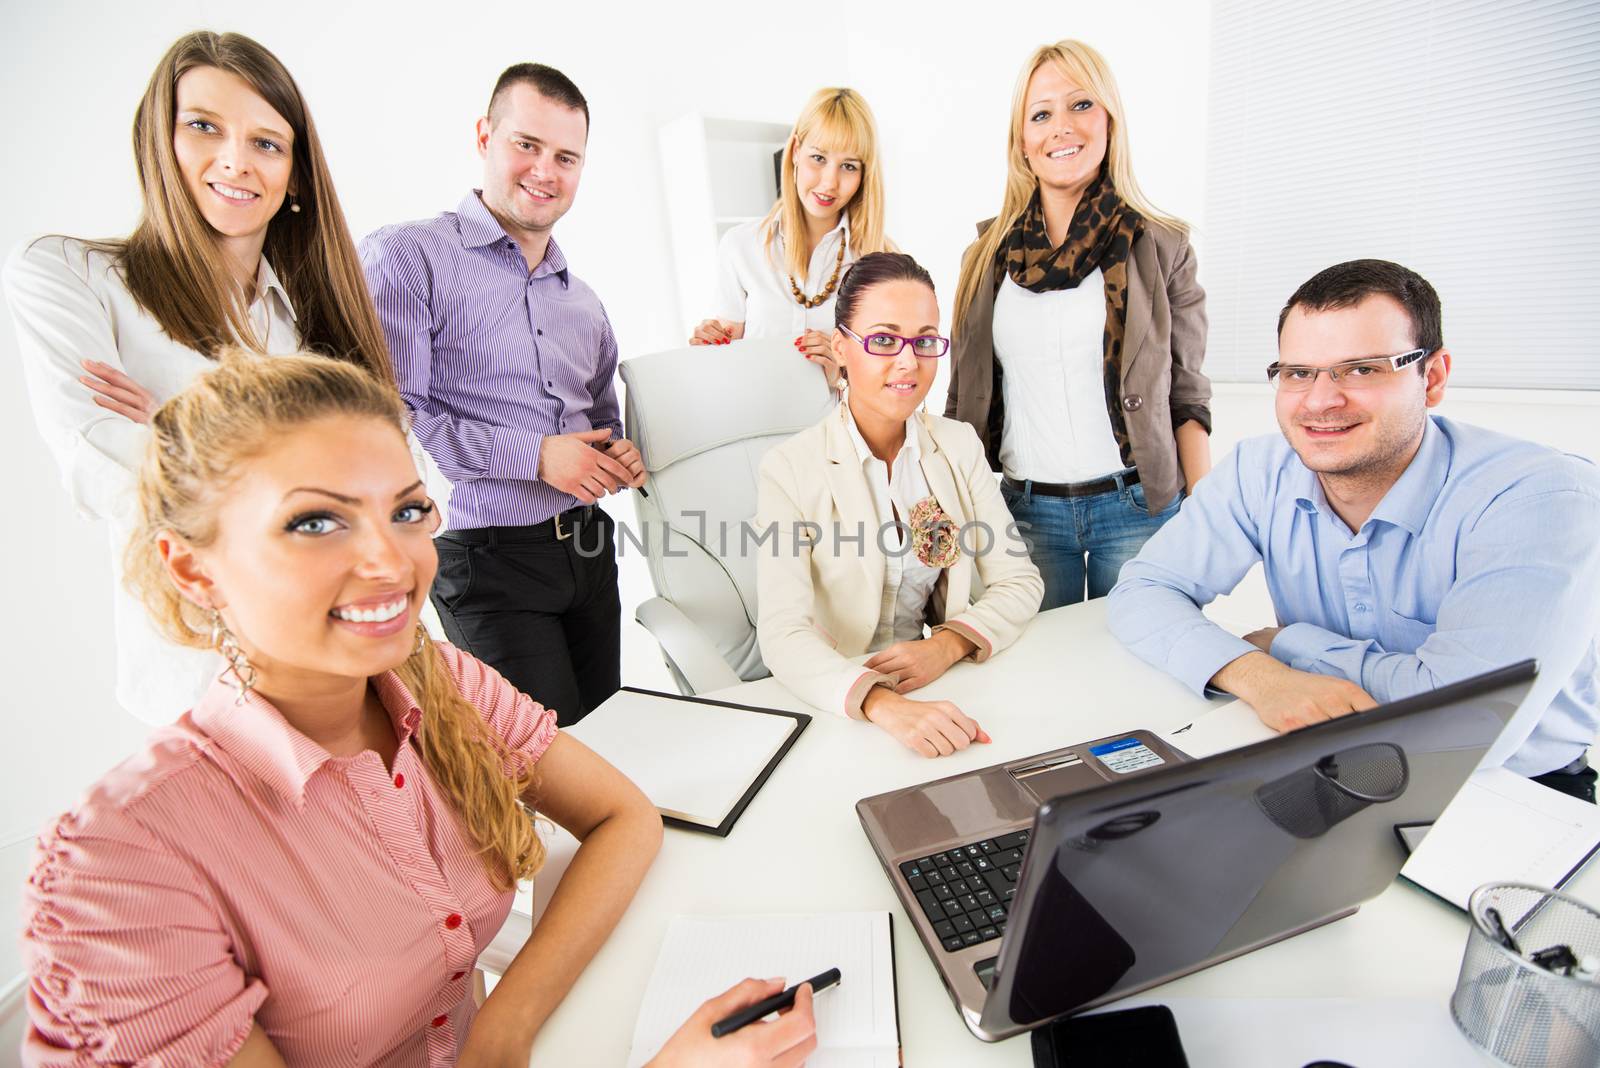 Group of a happy Successful Business People in the office looking at camera.